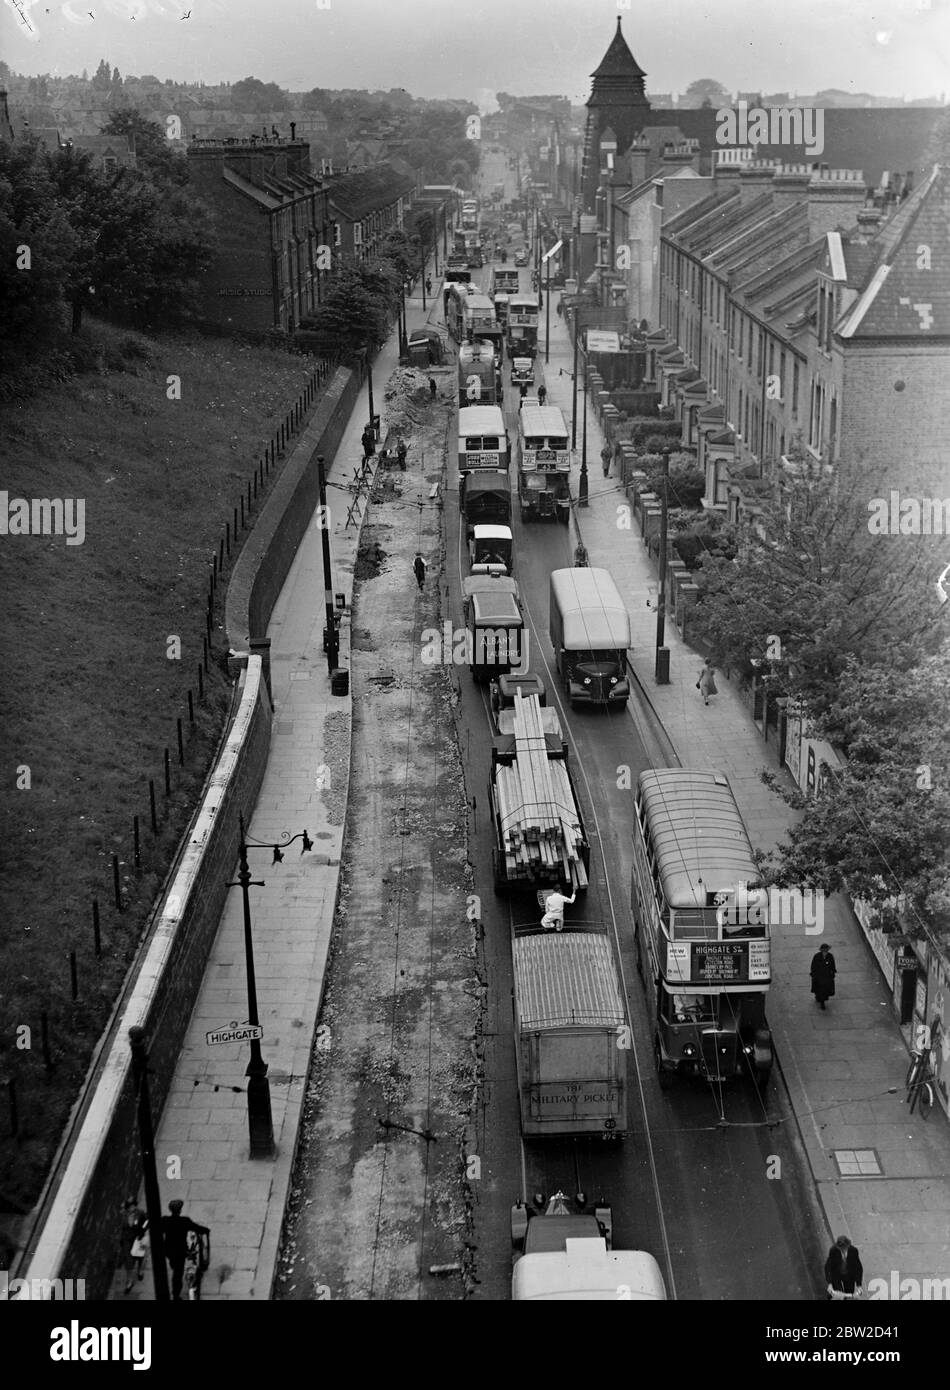 Streams of traffic a Mile Long Stretching down the Archway Road, Highgate, where now useless tramlines of being taken from the roadway. Trolleybuses have replaced trams in Archway Road. Photo shows the long lines of traffic at a standstill in Archway Road, Highgate. 20 June 1939 Stock Photo